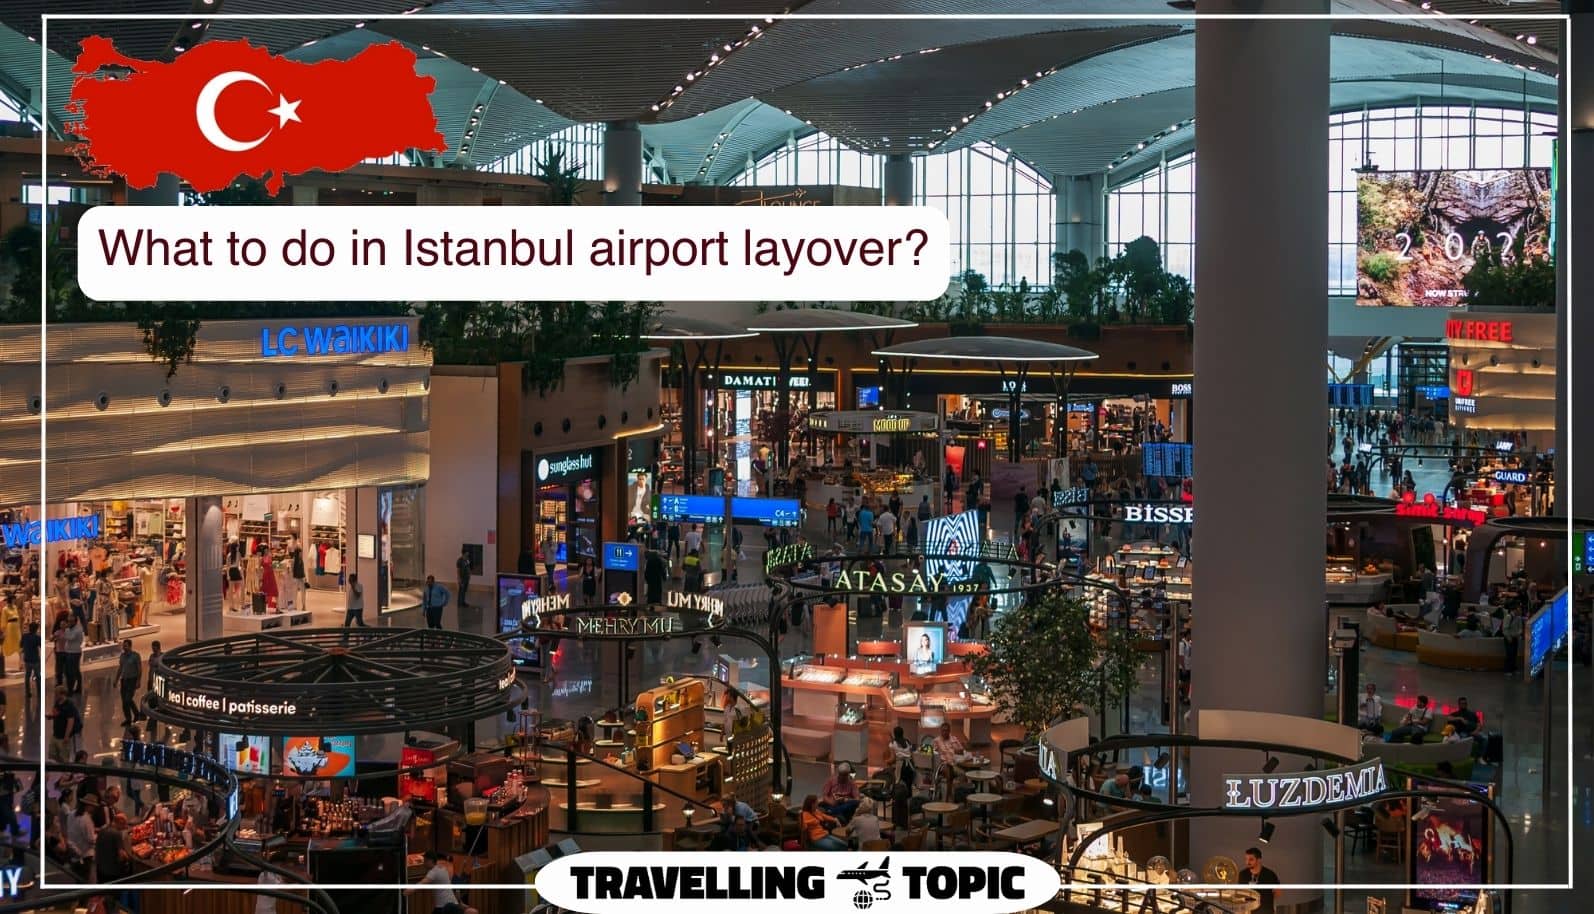 What to do in Istanbul airport layover?